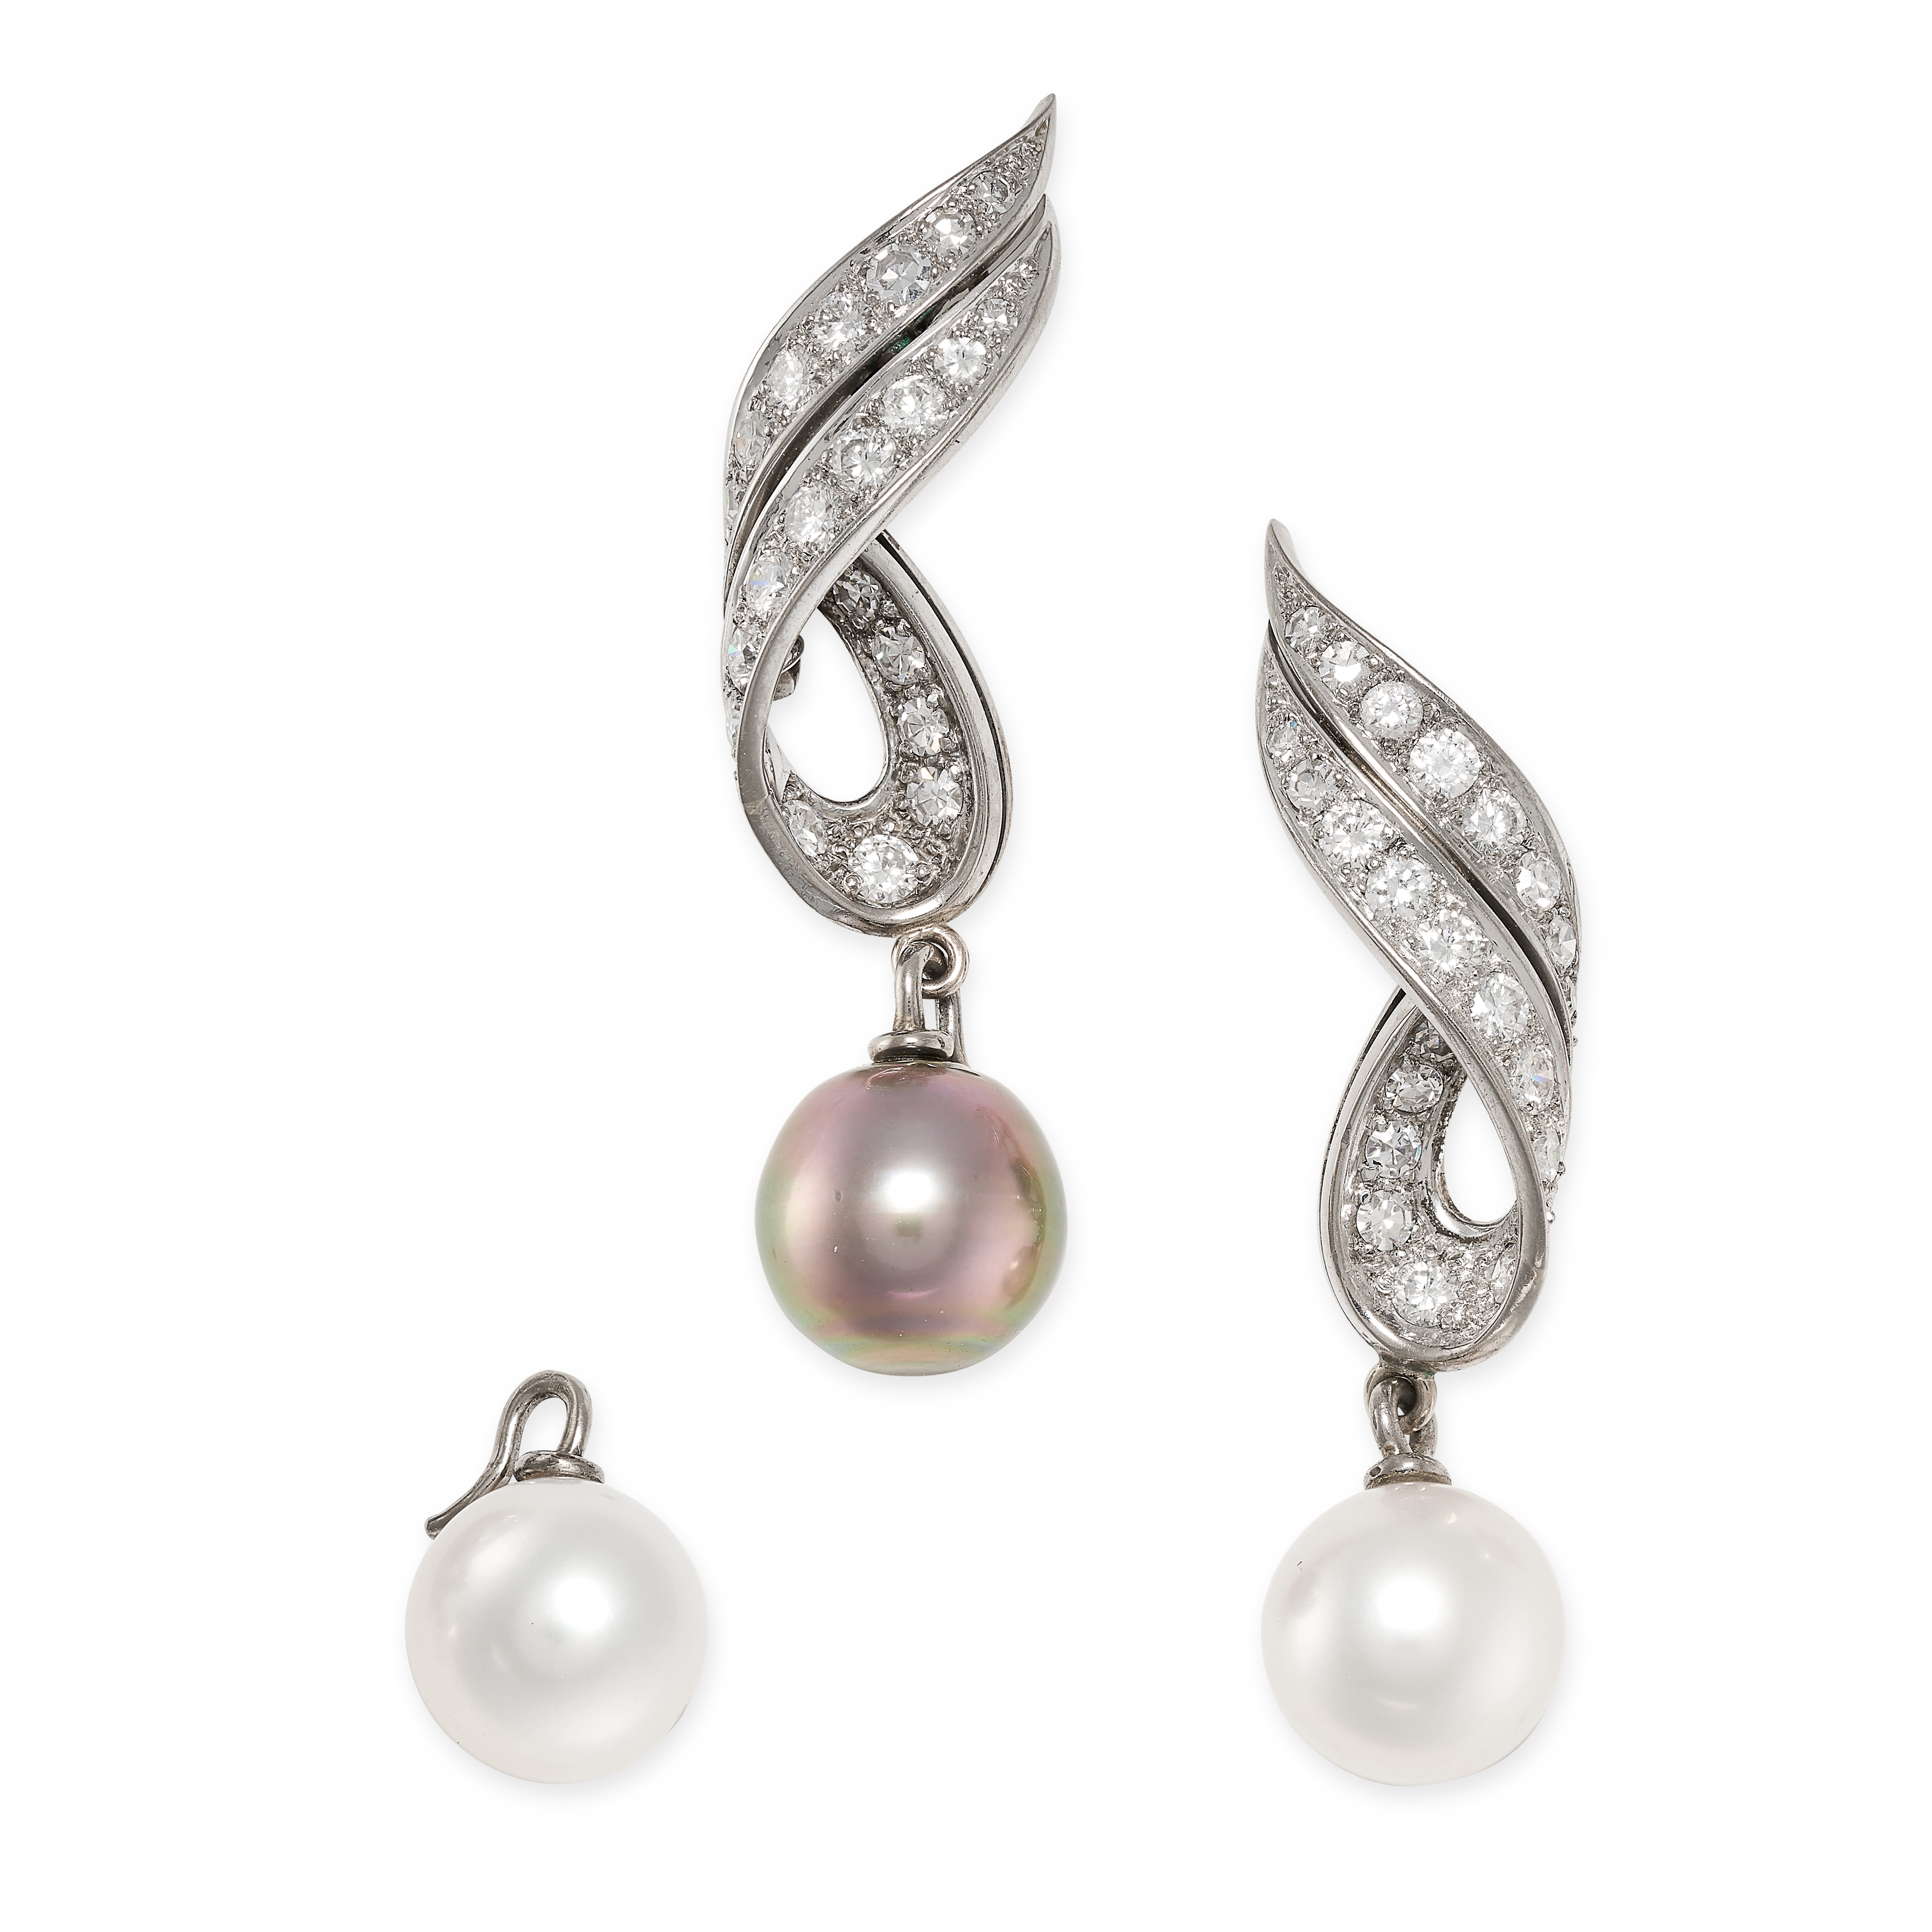 A PAIR OF PEARL AND DIAMOND EARRINGS in 18ct white gold, in scrolling design, each set with round